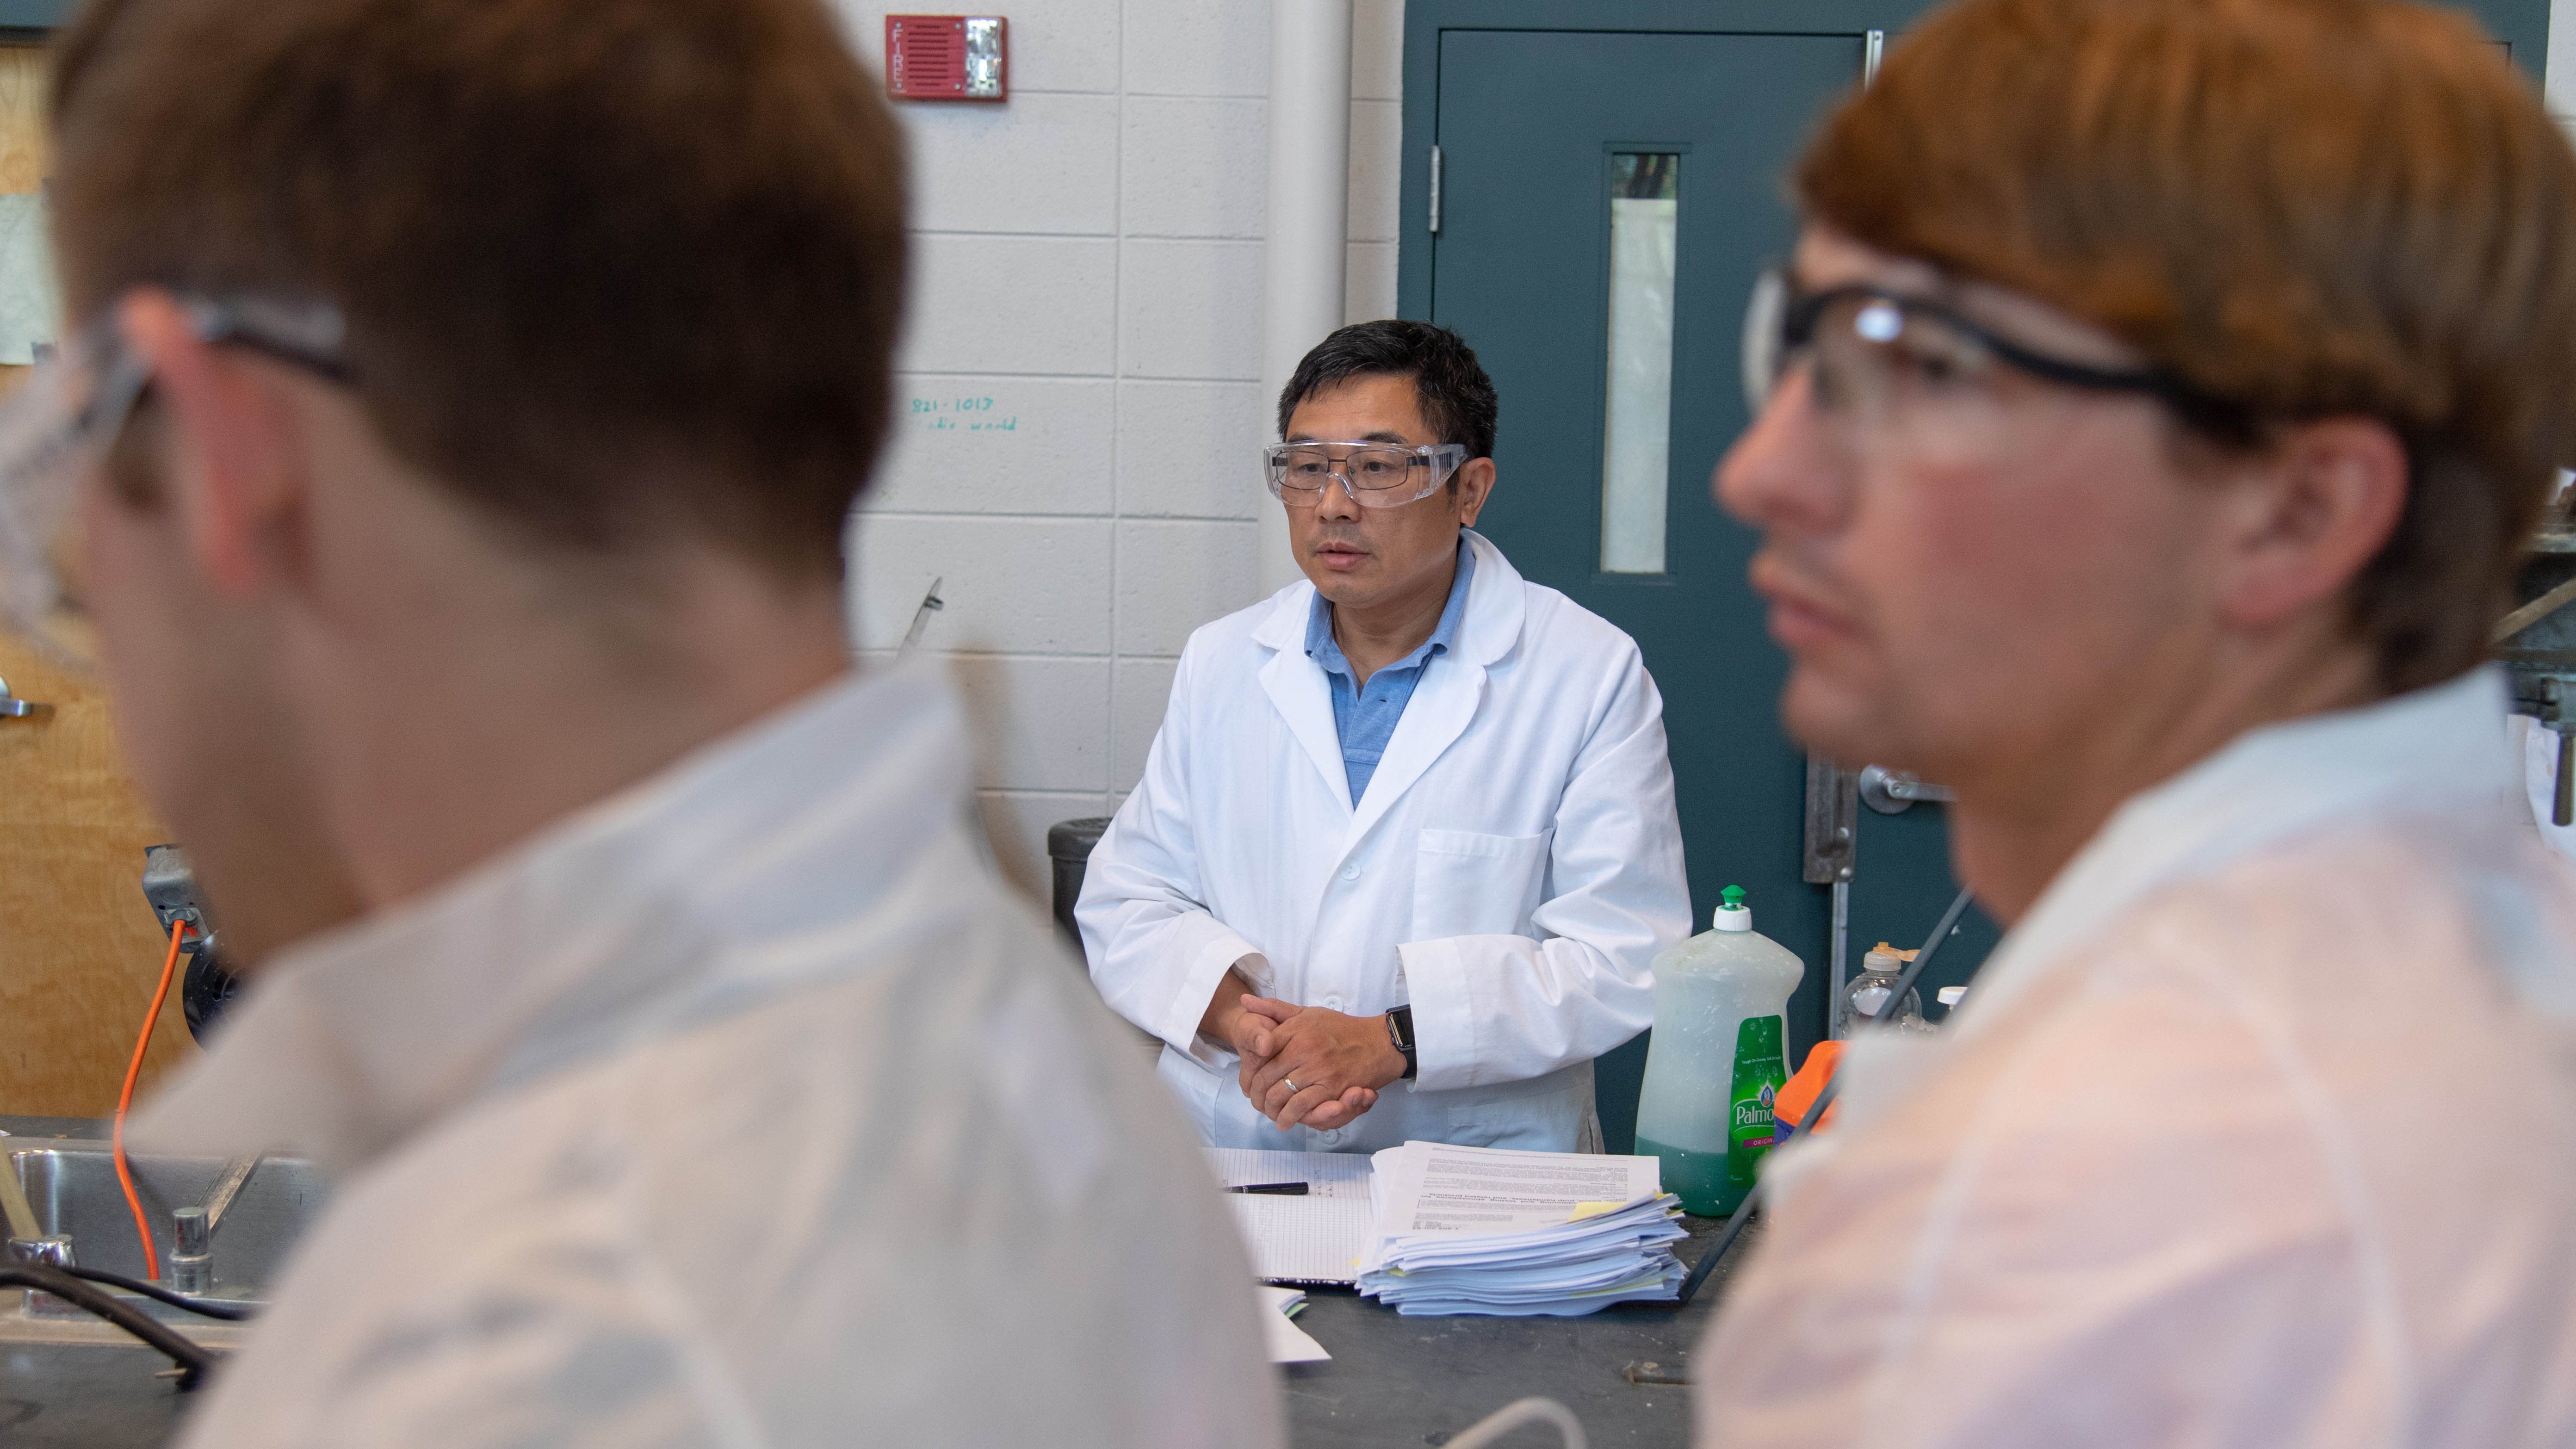 APPF Director Zhihua Jiang, assistant professor of chemical engineering in the Samuel Ginn College of Engineering, oversees students in the lab.